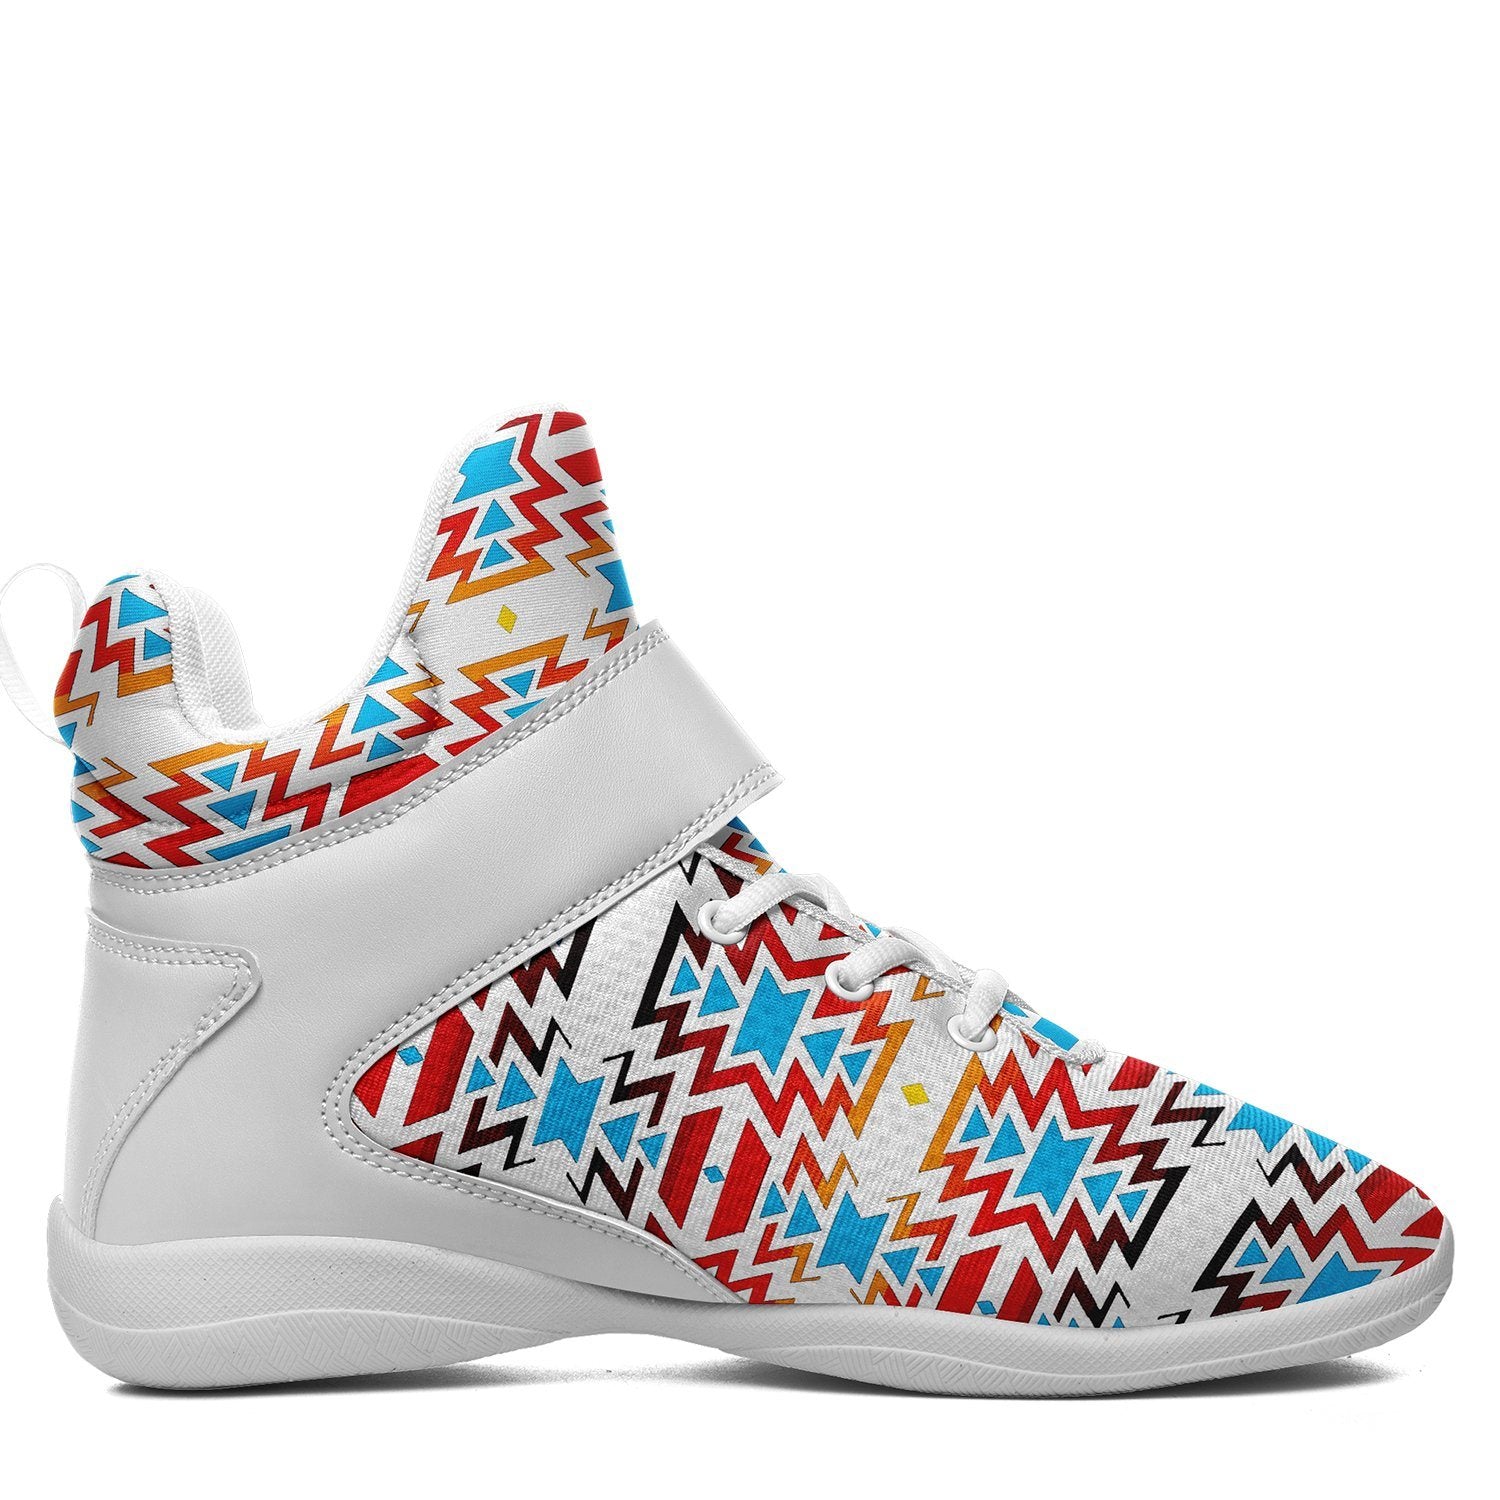 Fire Colors and Sky Ipottaa Basketball / Sport High Top Shoes 49 Dzine 